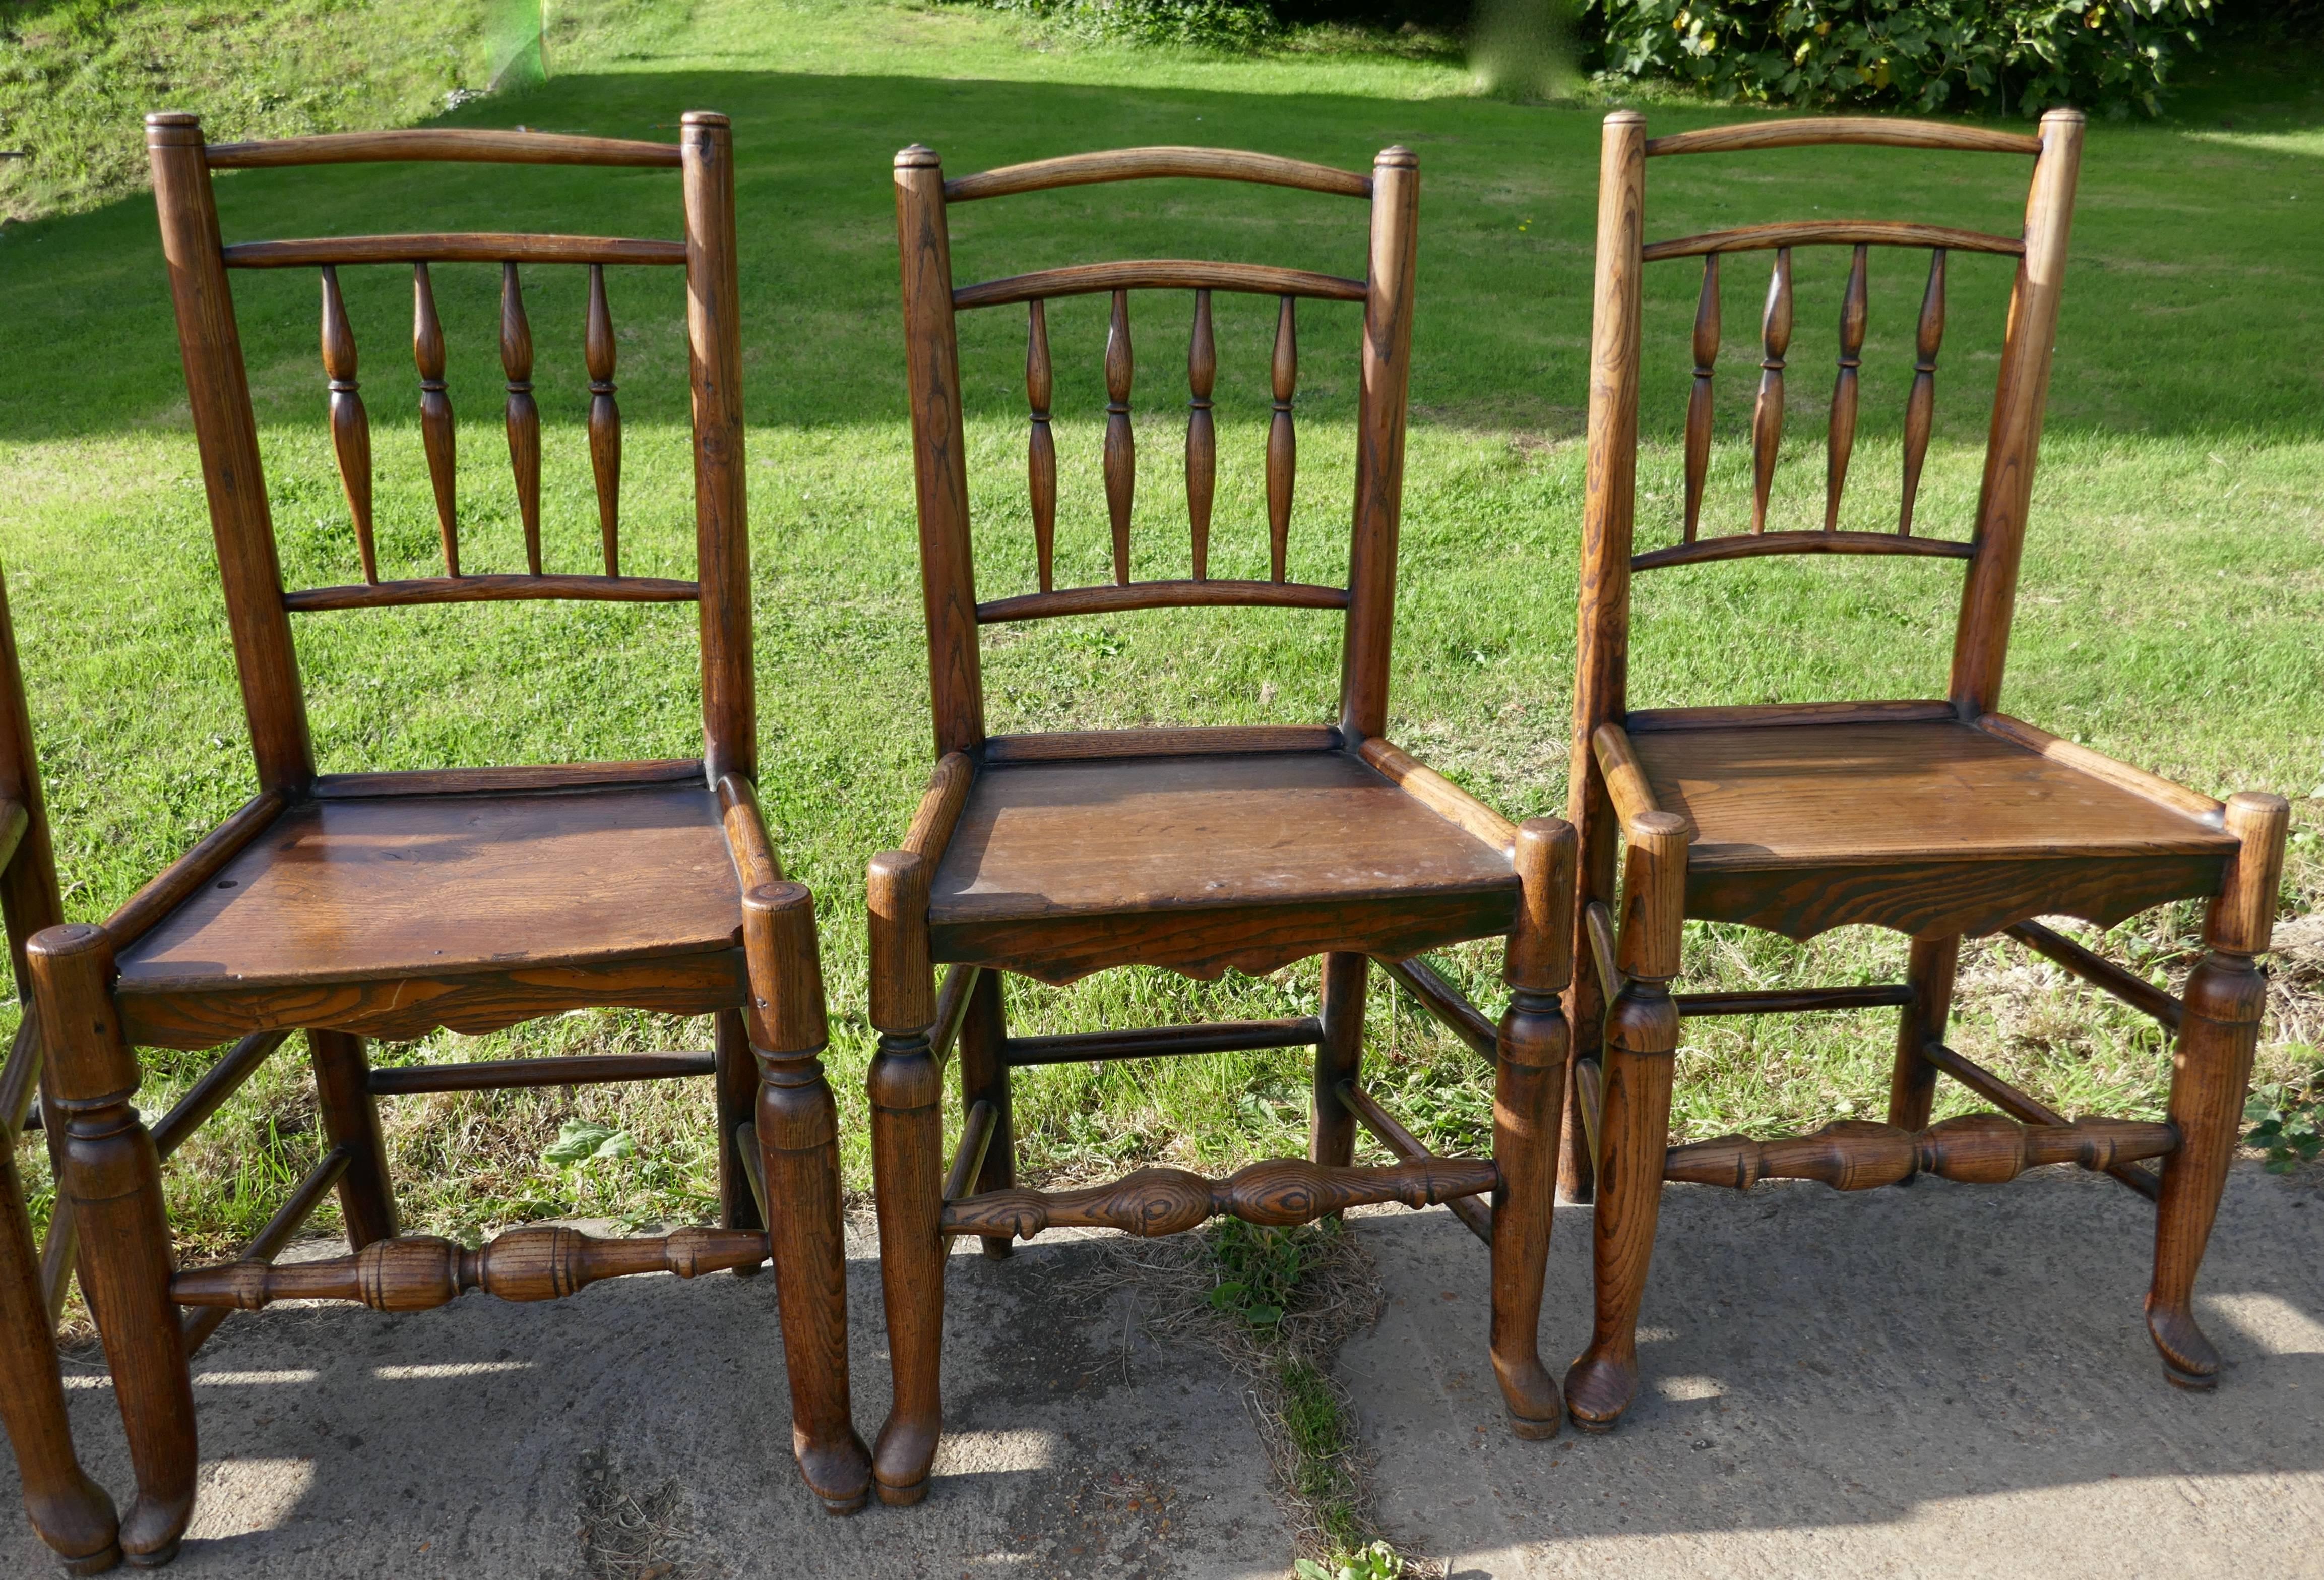 This a great find, we have a set of these charming antique west Midlands chairs, they all have elm plank seats and with spindled backs

The chairs are sound, some of them show signs of old woodworm as to be expected in chairs of this age, one has